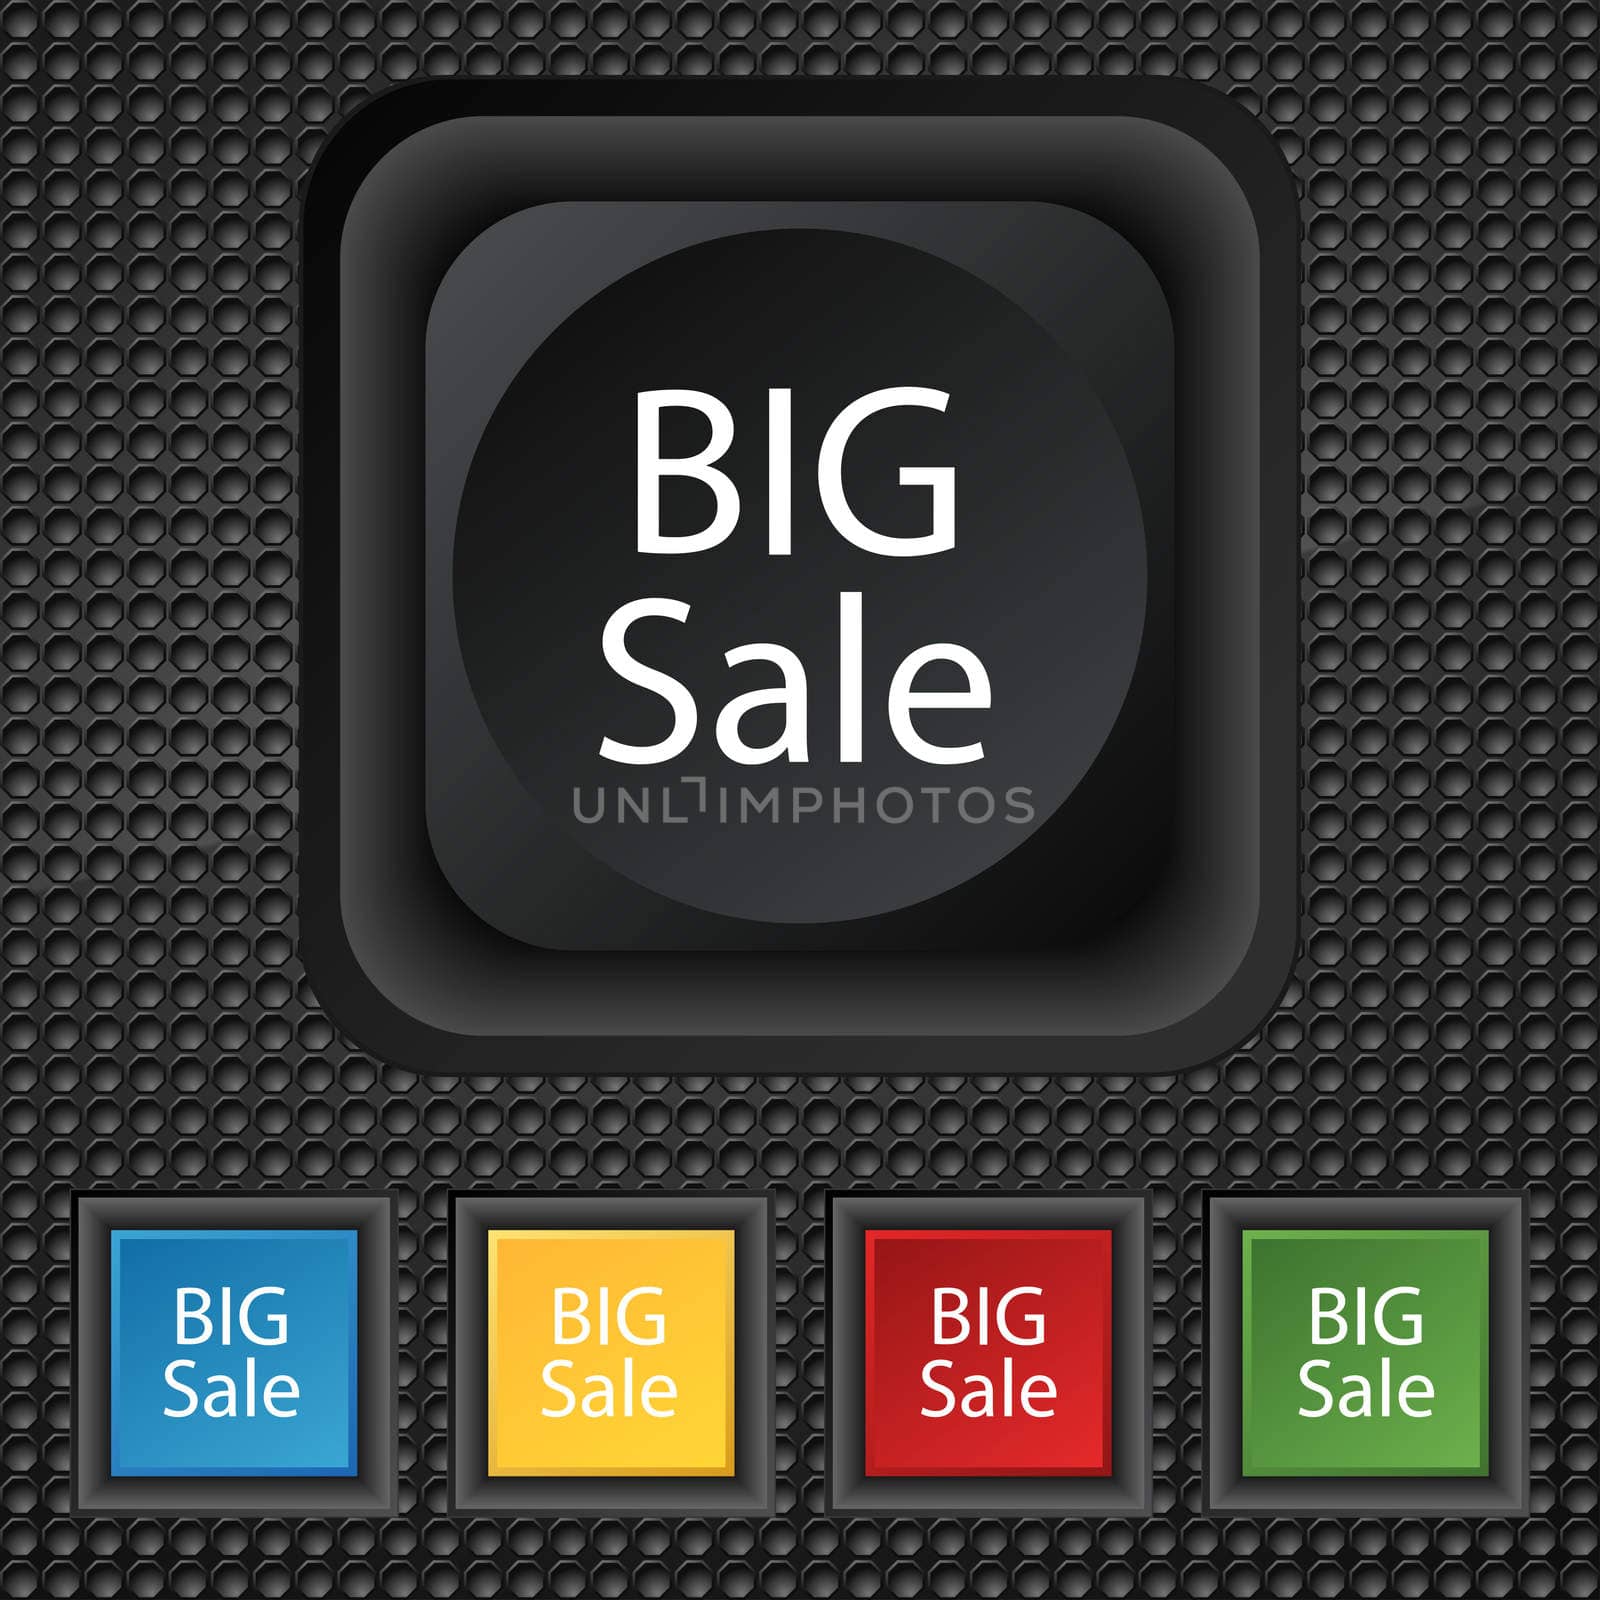 Big sale sign icon. Special offer symbol. Set of colored buttons. illustration